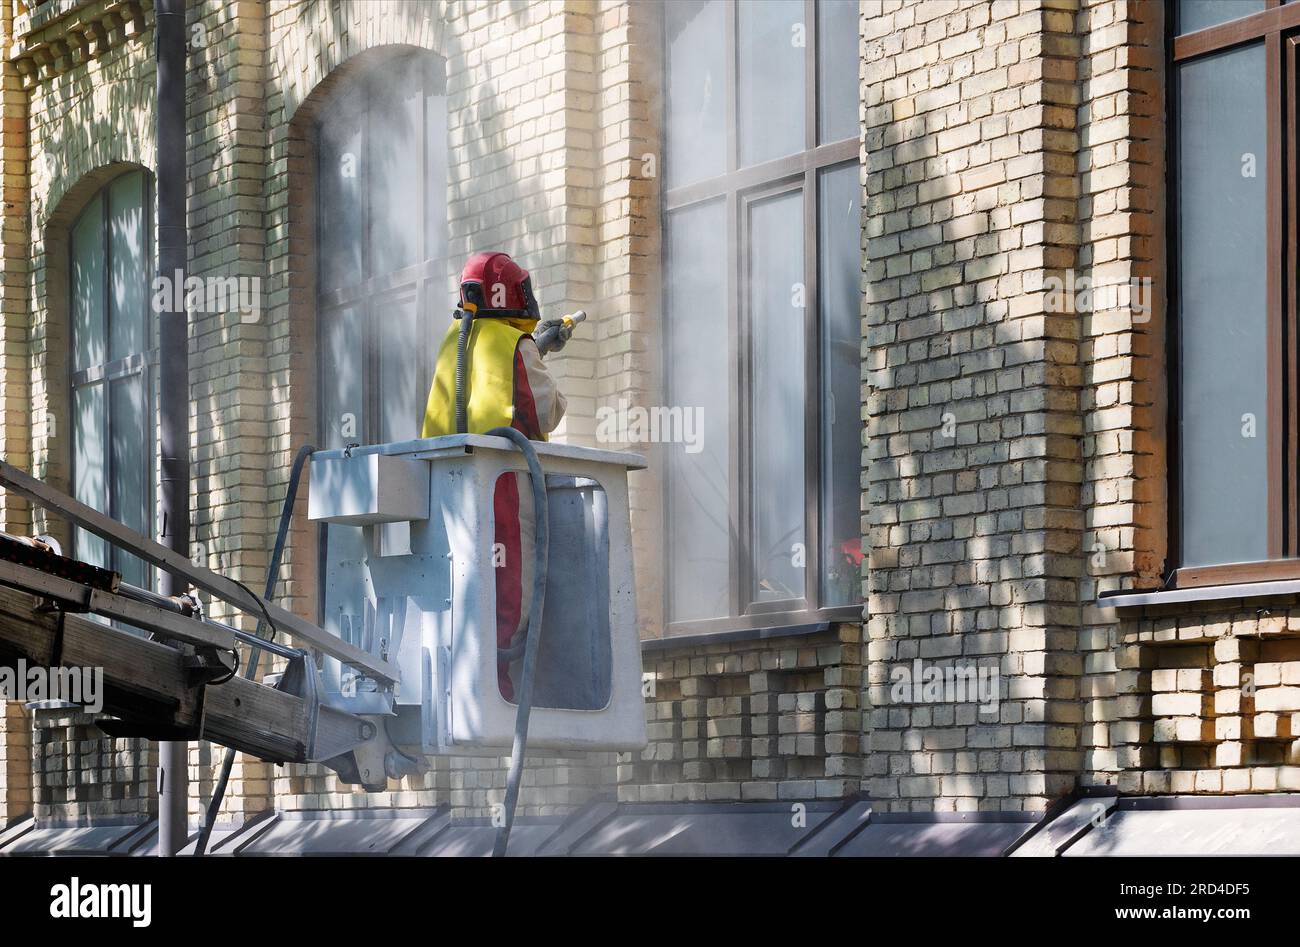 A worker in a protective suit cleans the facade of an old brick house with an industrial sandblaster. Stock Photo